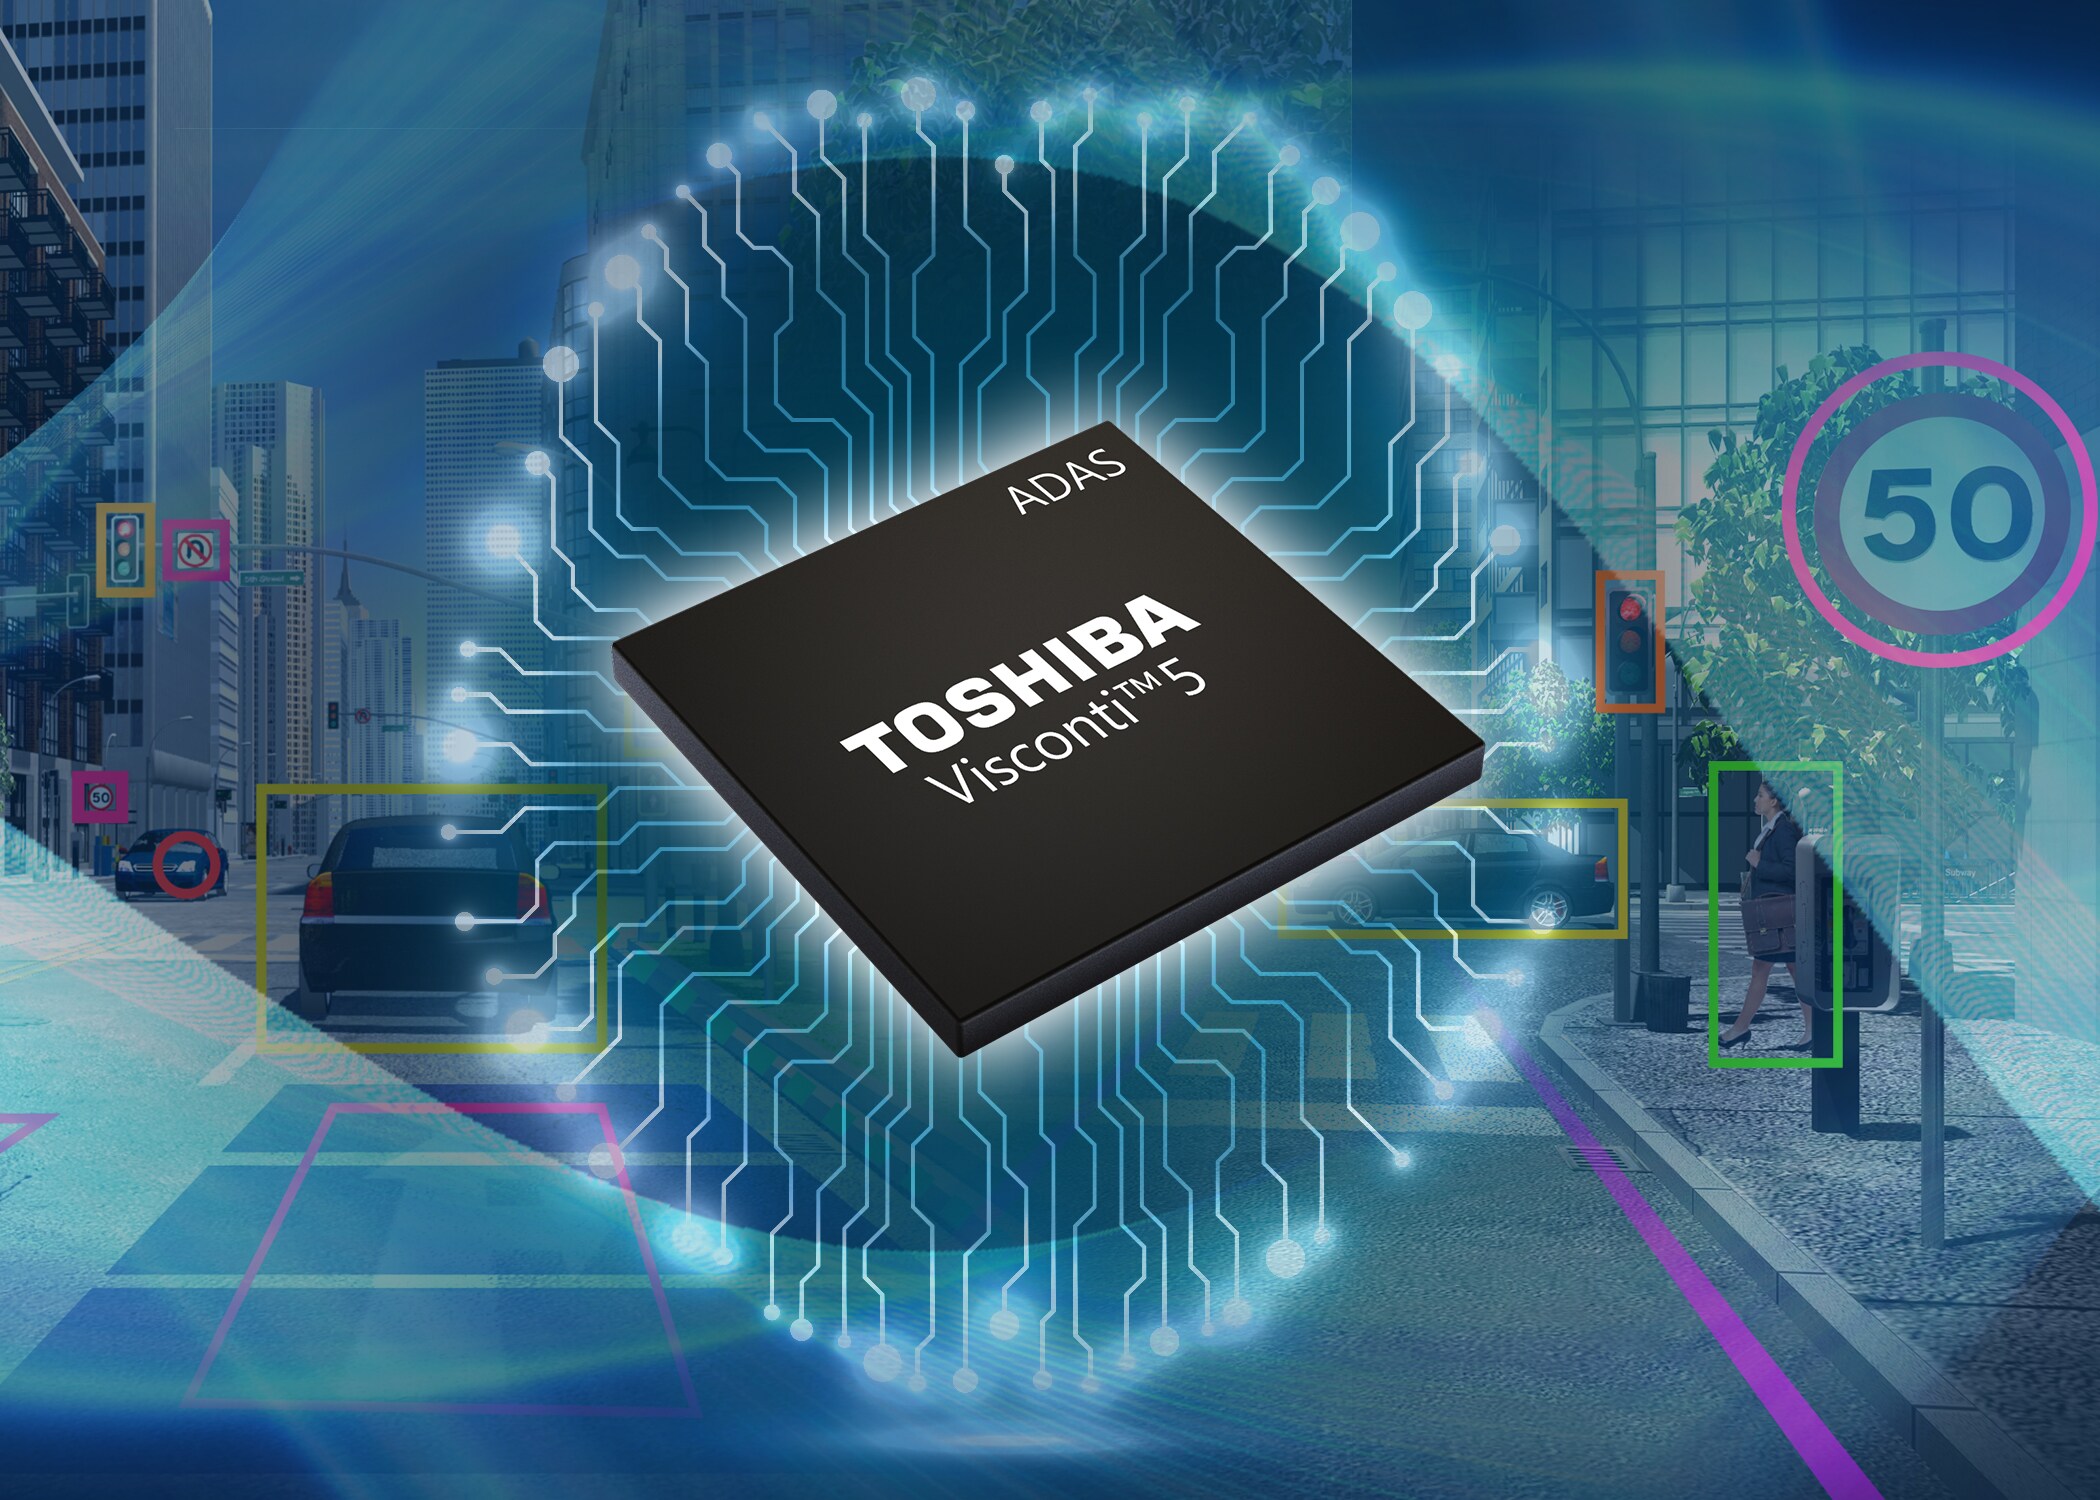 Toshiba Develops DNN Hardware IP for Image Recognition AI Processor ViscontiTM5 for Automotive Driver Assistance Systems